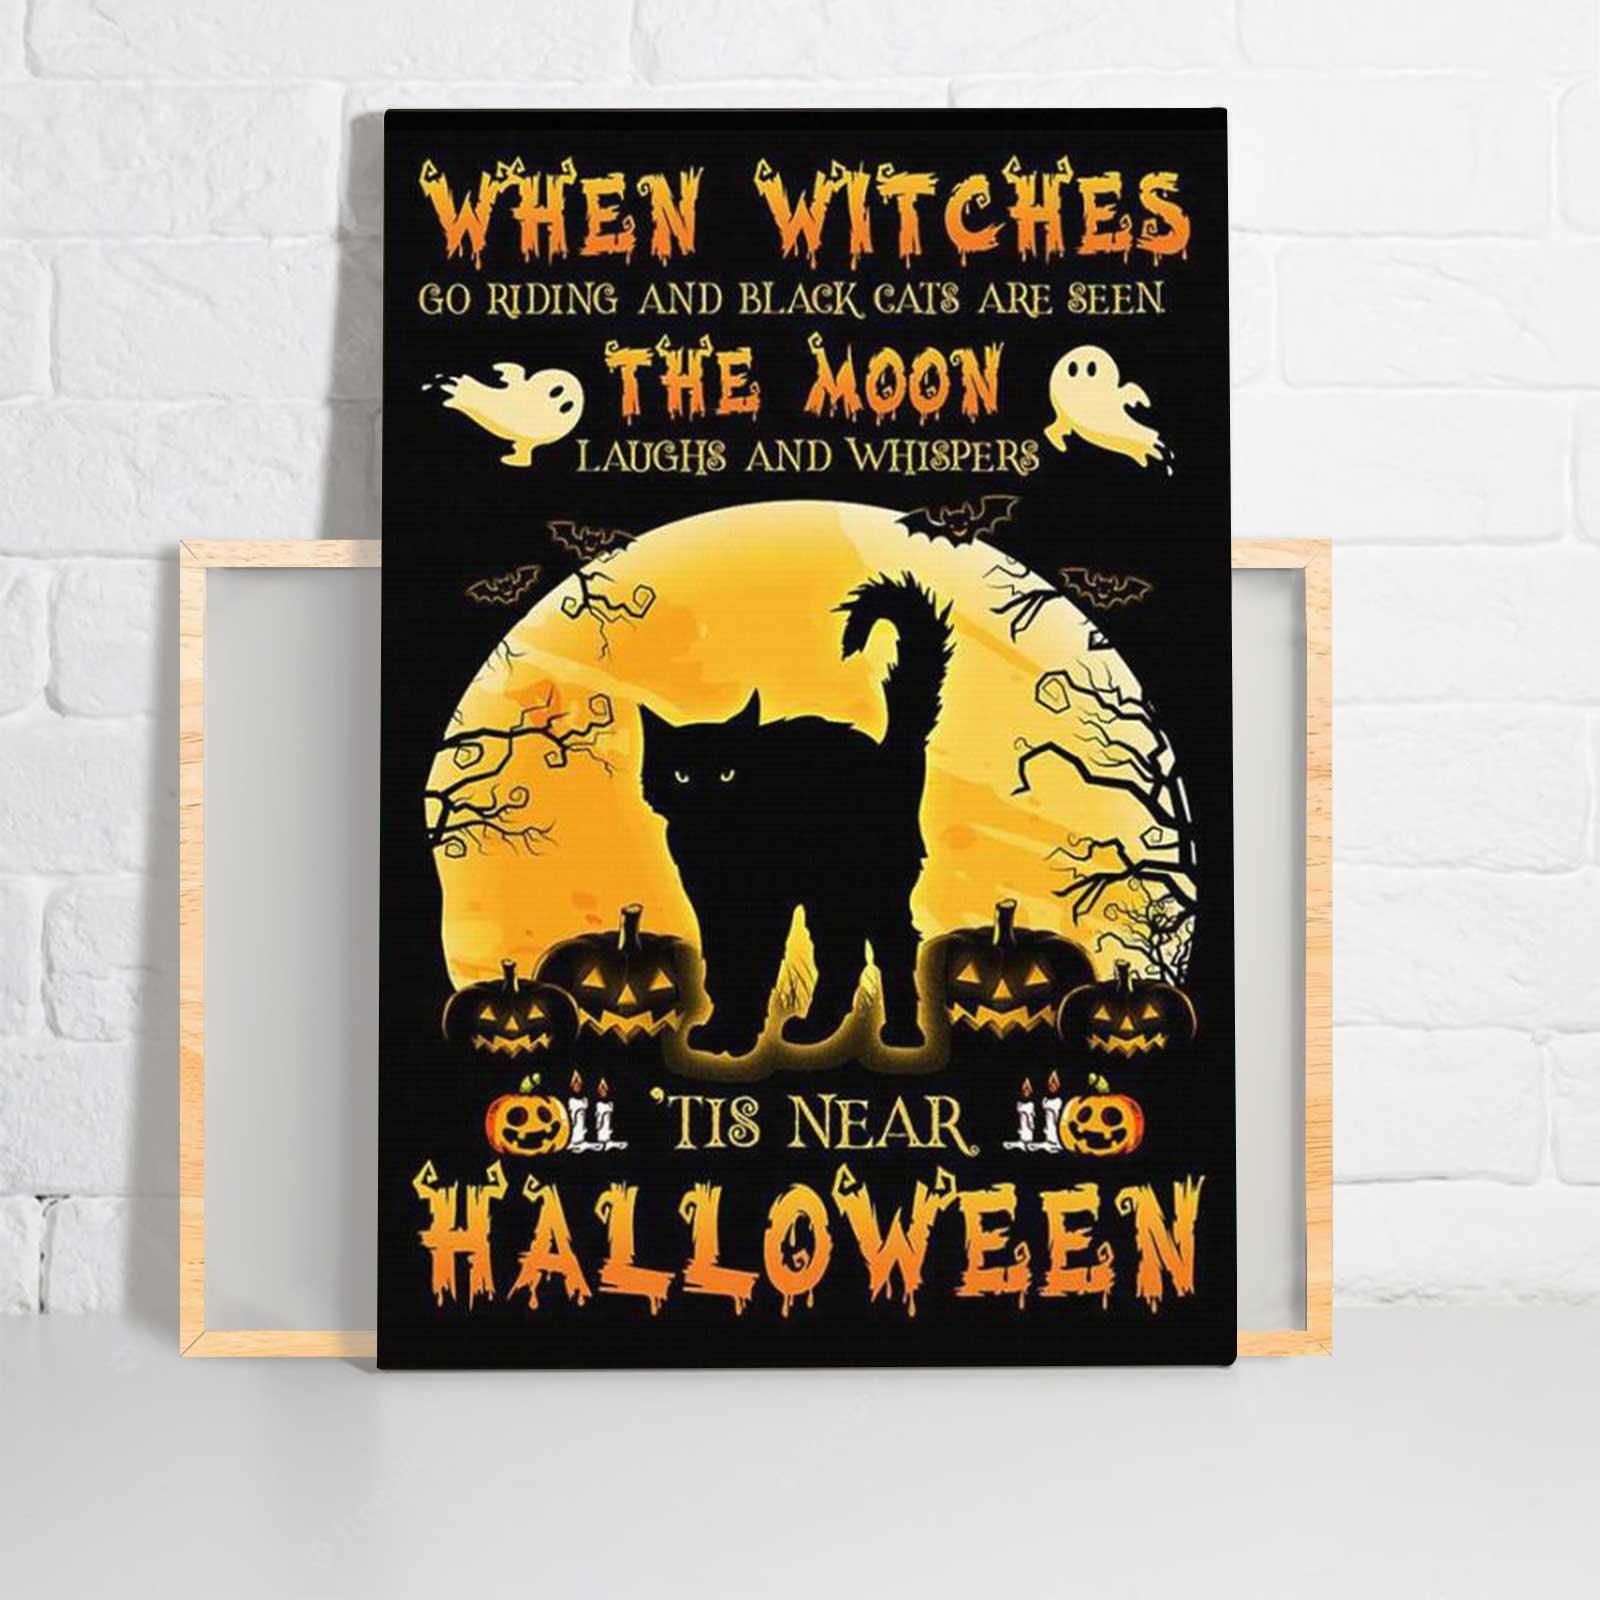 Black Cat Portrait Canvas - Black Cats When Witches Go Riding And Black Cats Are Seen Halloween - Perfect Gift For Black Cat Lovers, Cat Lovers - Amzanimalsgift